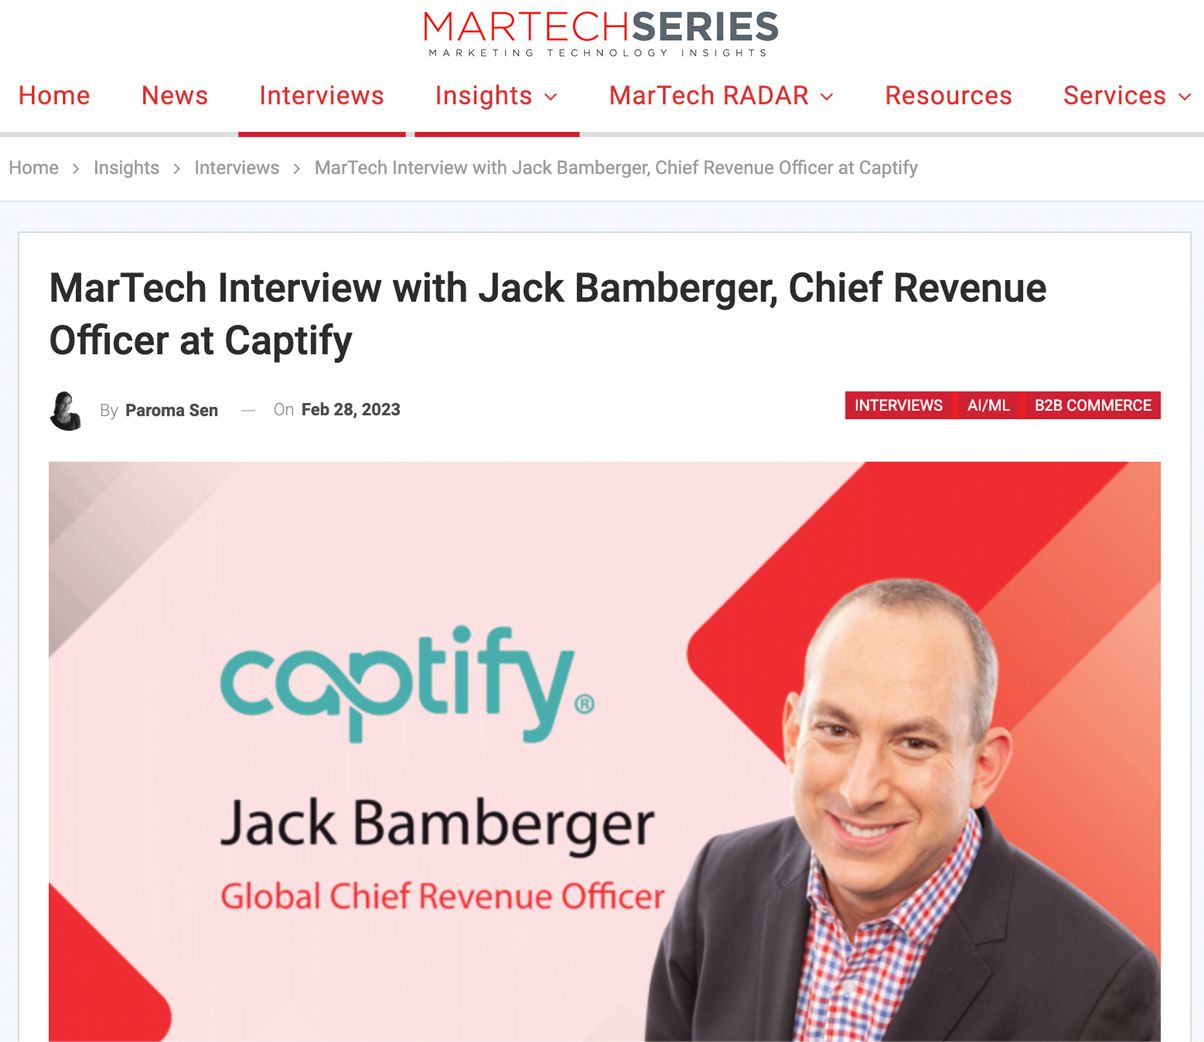 MarTech Series: Interview with Jack Bamberger, Chief Revenue Officer at Captify